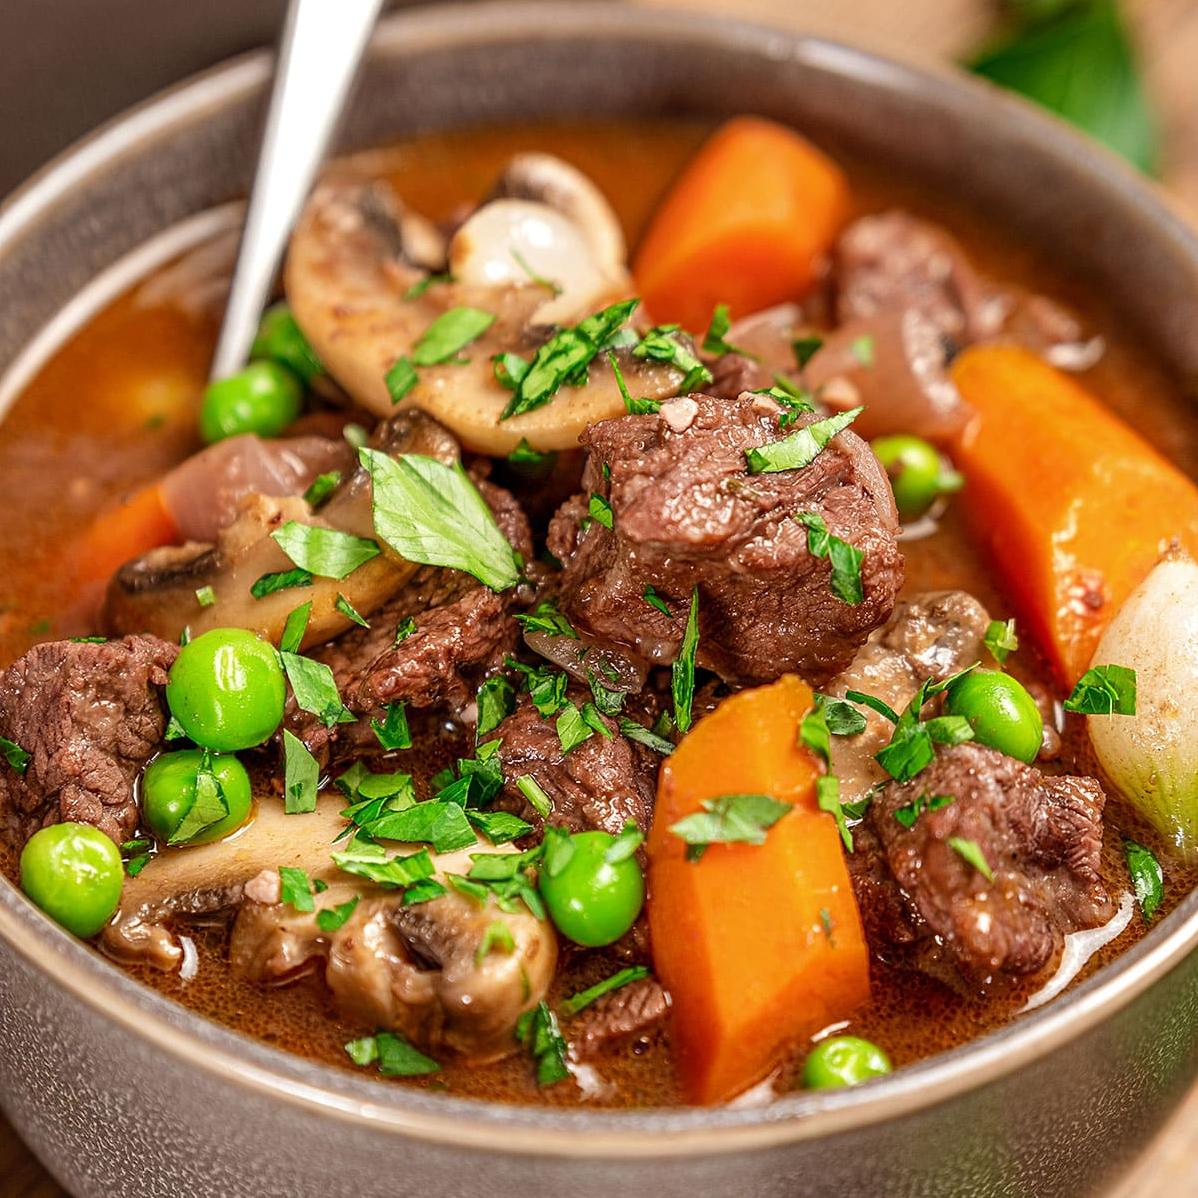  A hearty beef stew, perfect for chilly evenings